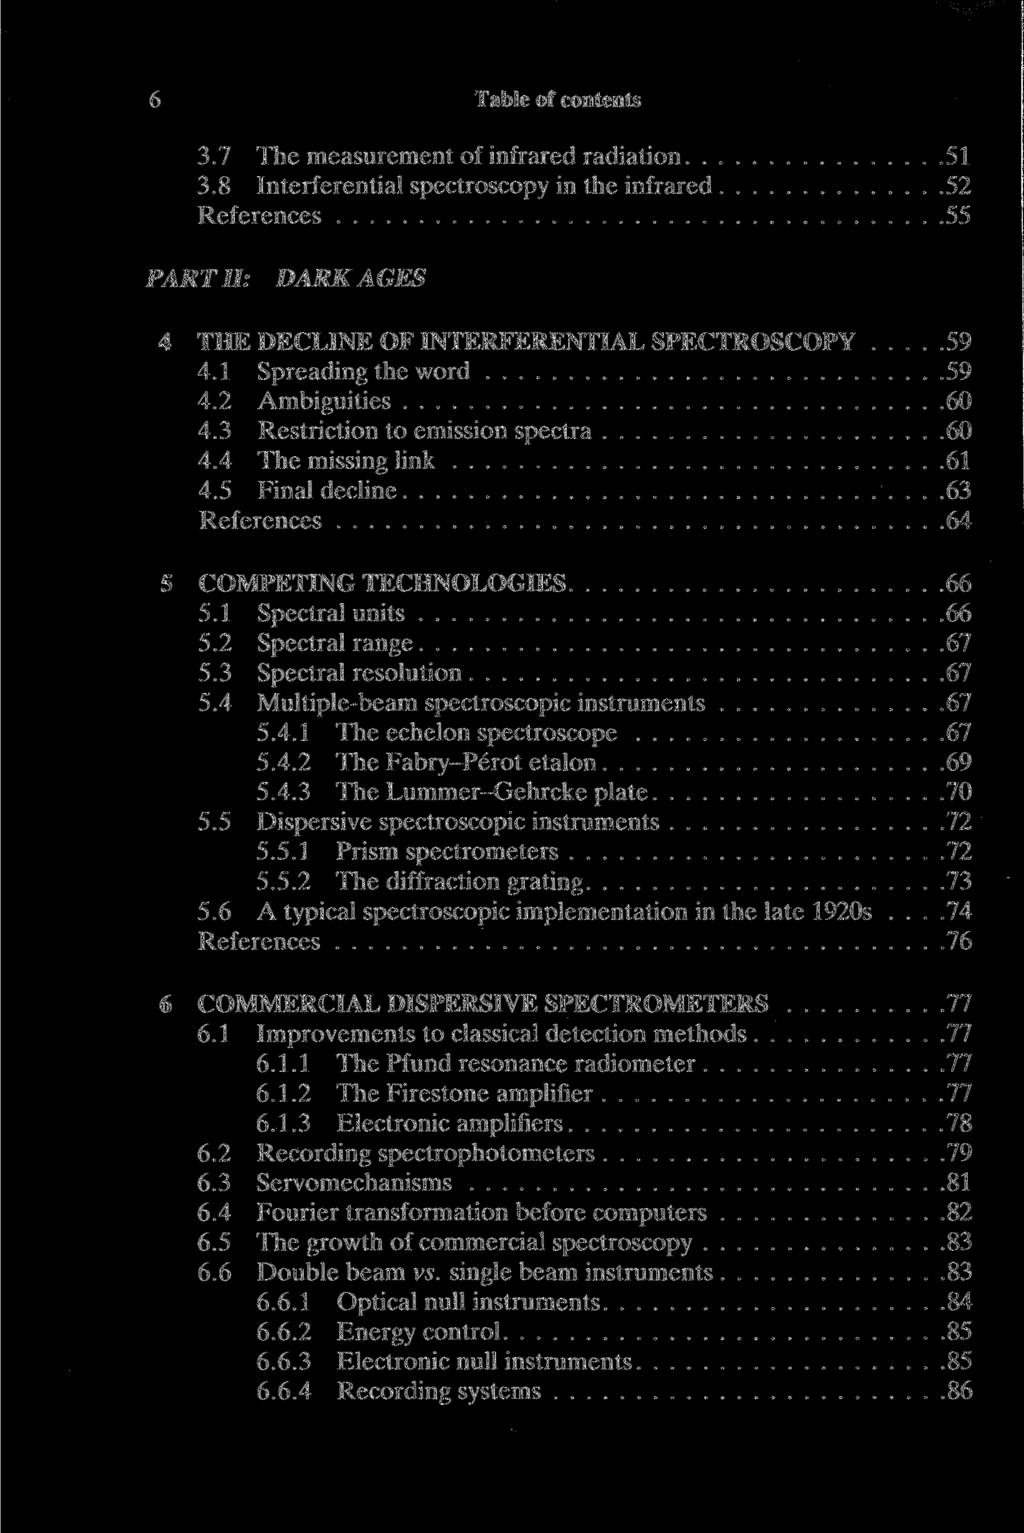 6 Table of contents 3.7 The measurement of infrared radiation 51 3.8 Interferential spectroscopy in the infrared 52 References 55 PART II: DARKAGES 4 THE DECLINE OF INTERFERENTIAL SPECTROSCOPY 59 4.